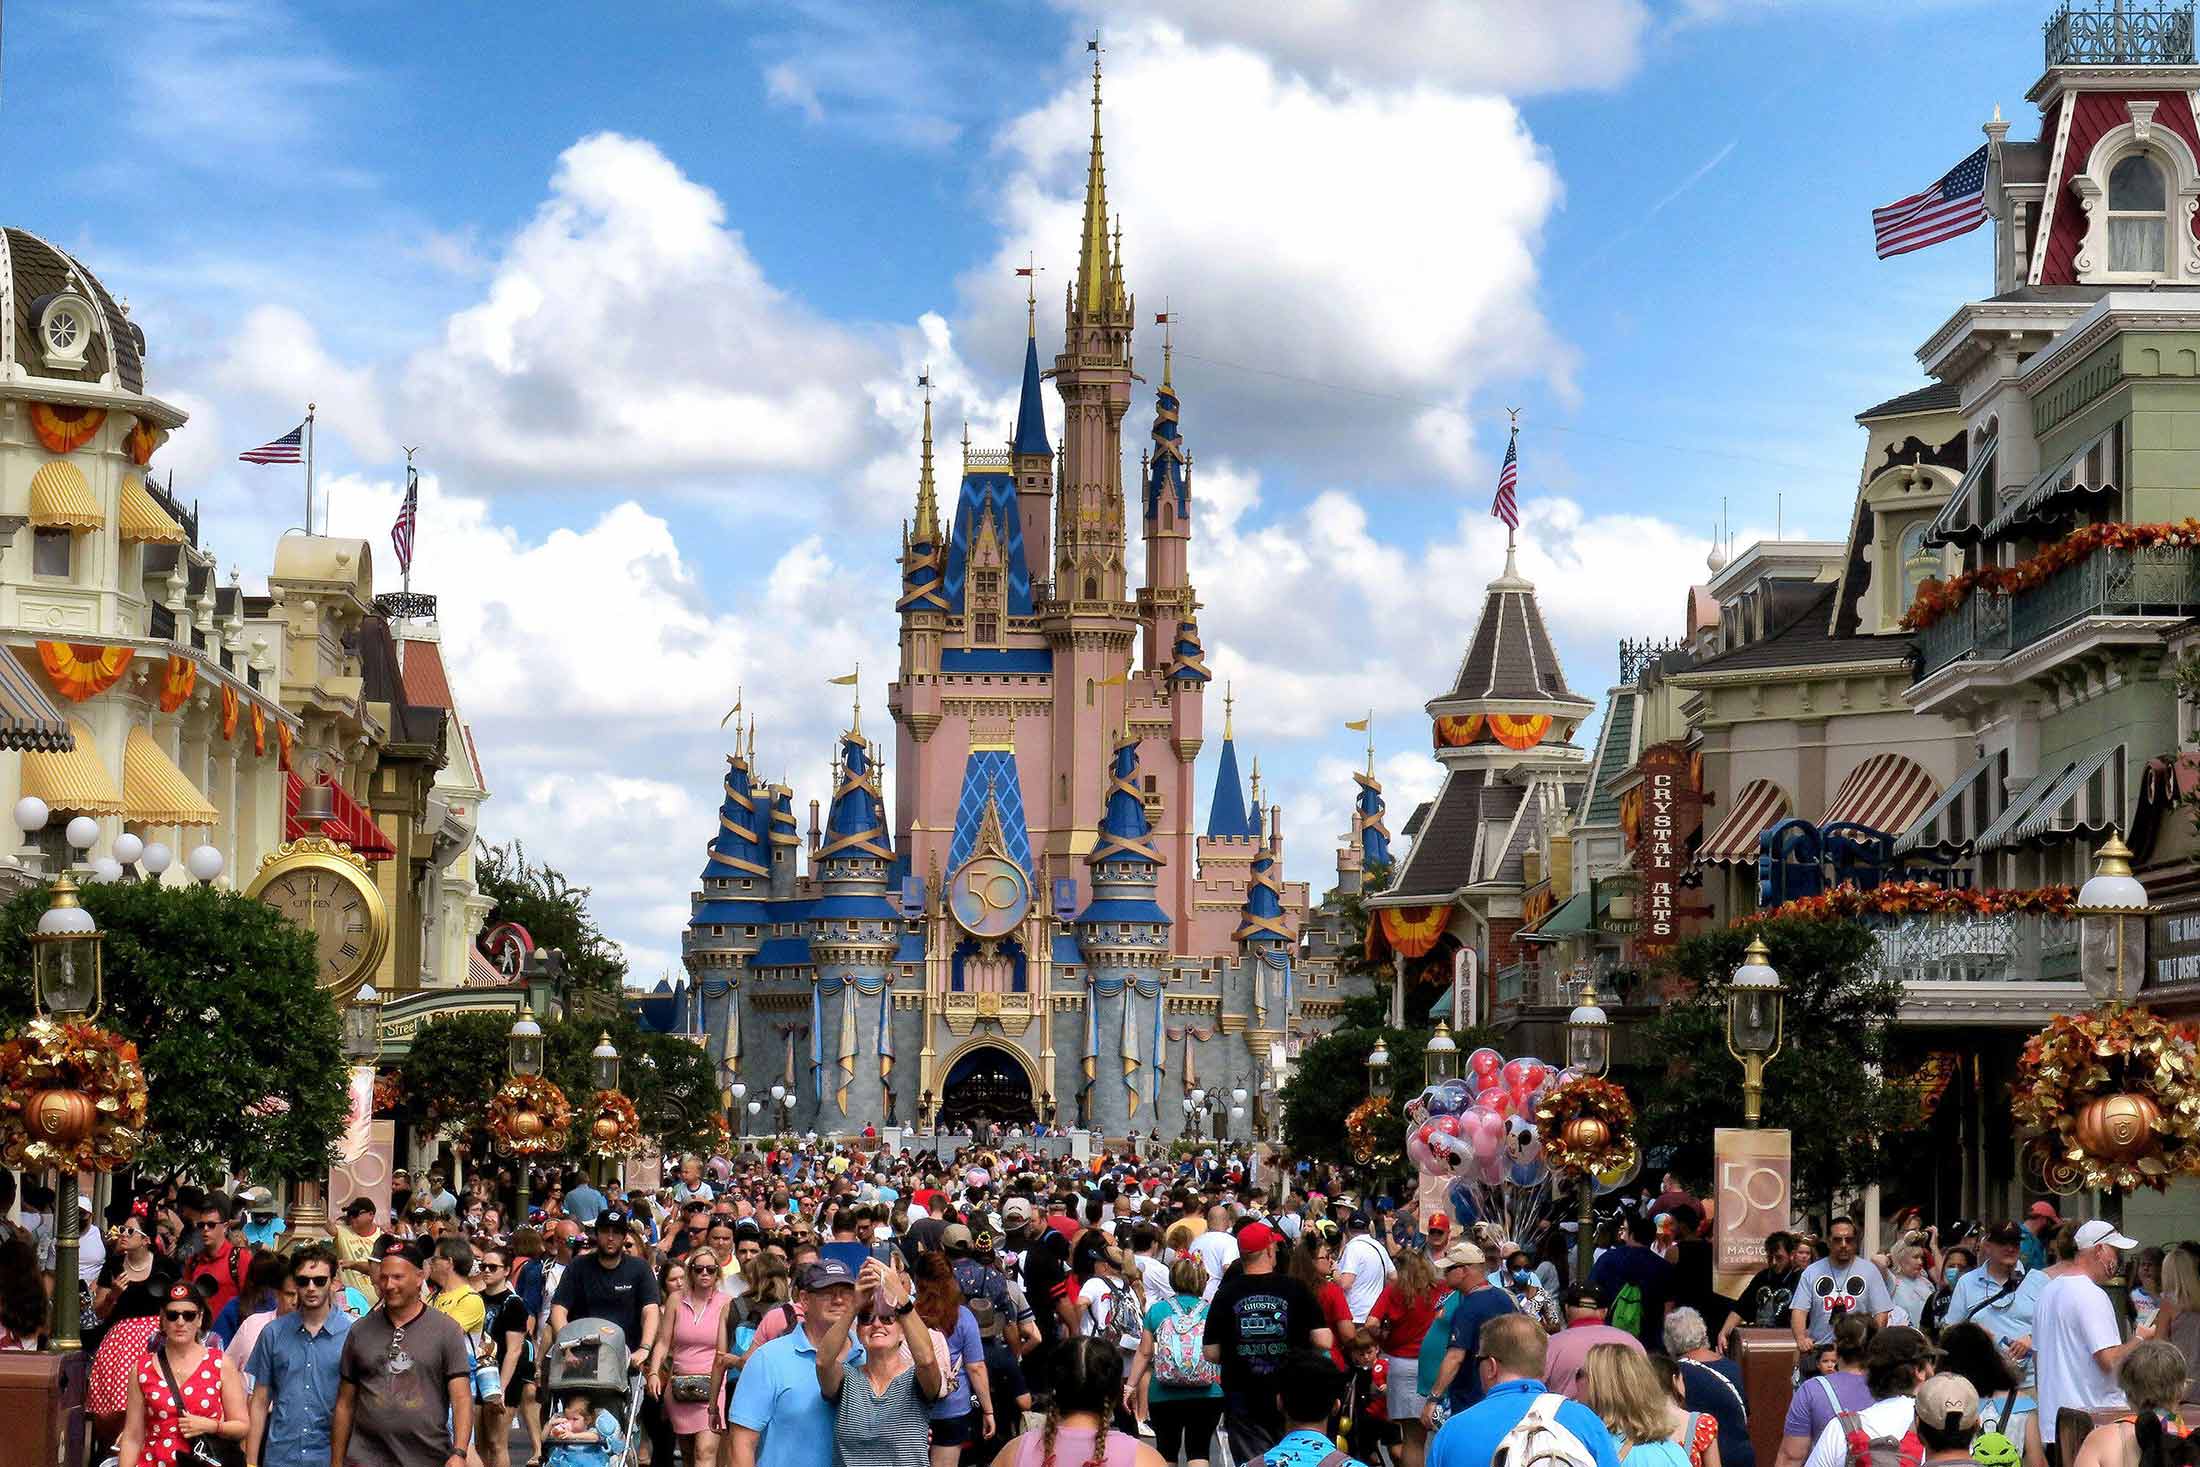 Will Save For Travel Adults Only Disney World Trip - Will Save For Travel